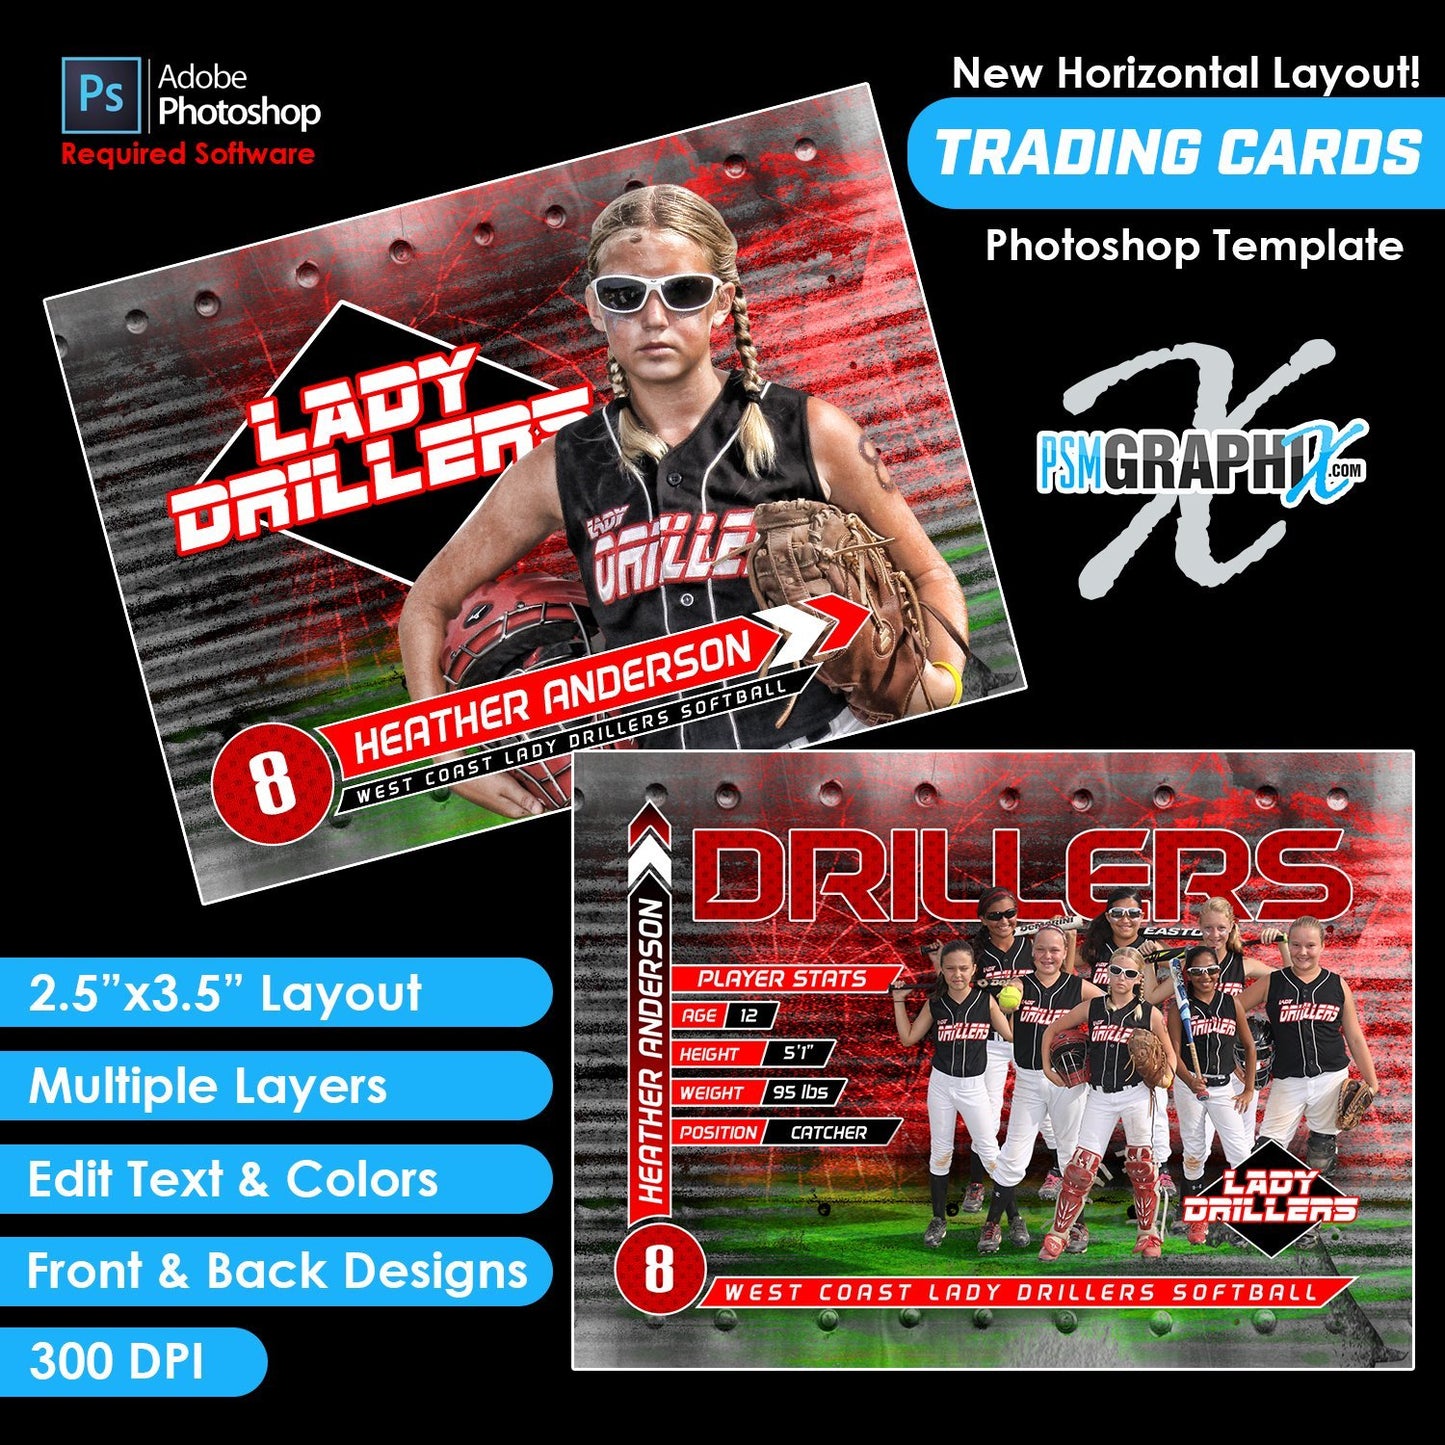 ULTIMATE COLLECTION - Limited Time Special - Game Day Trading Card Templates-Photoshop Template - PSMGraphix